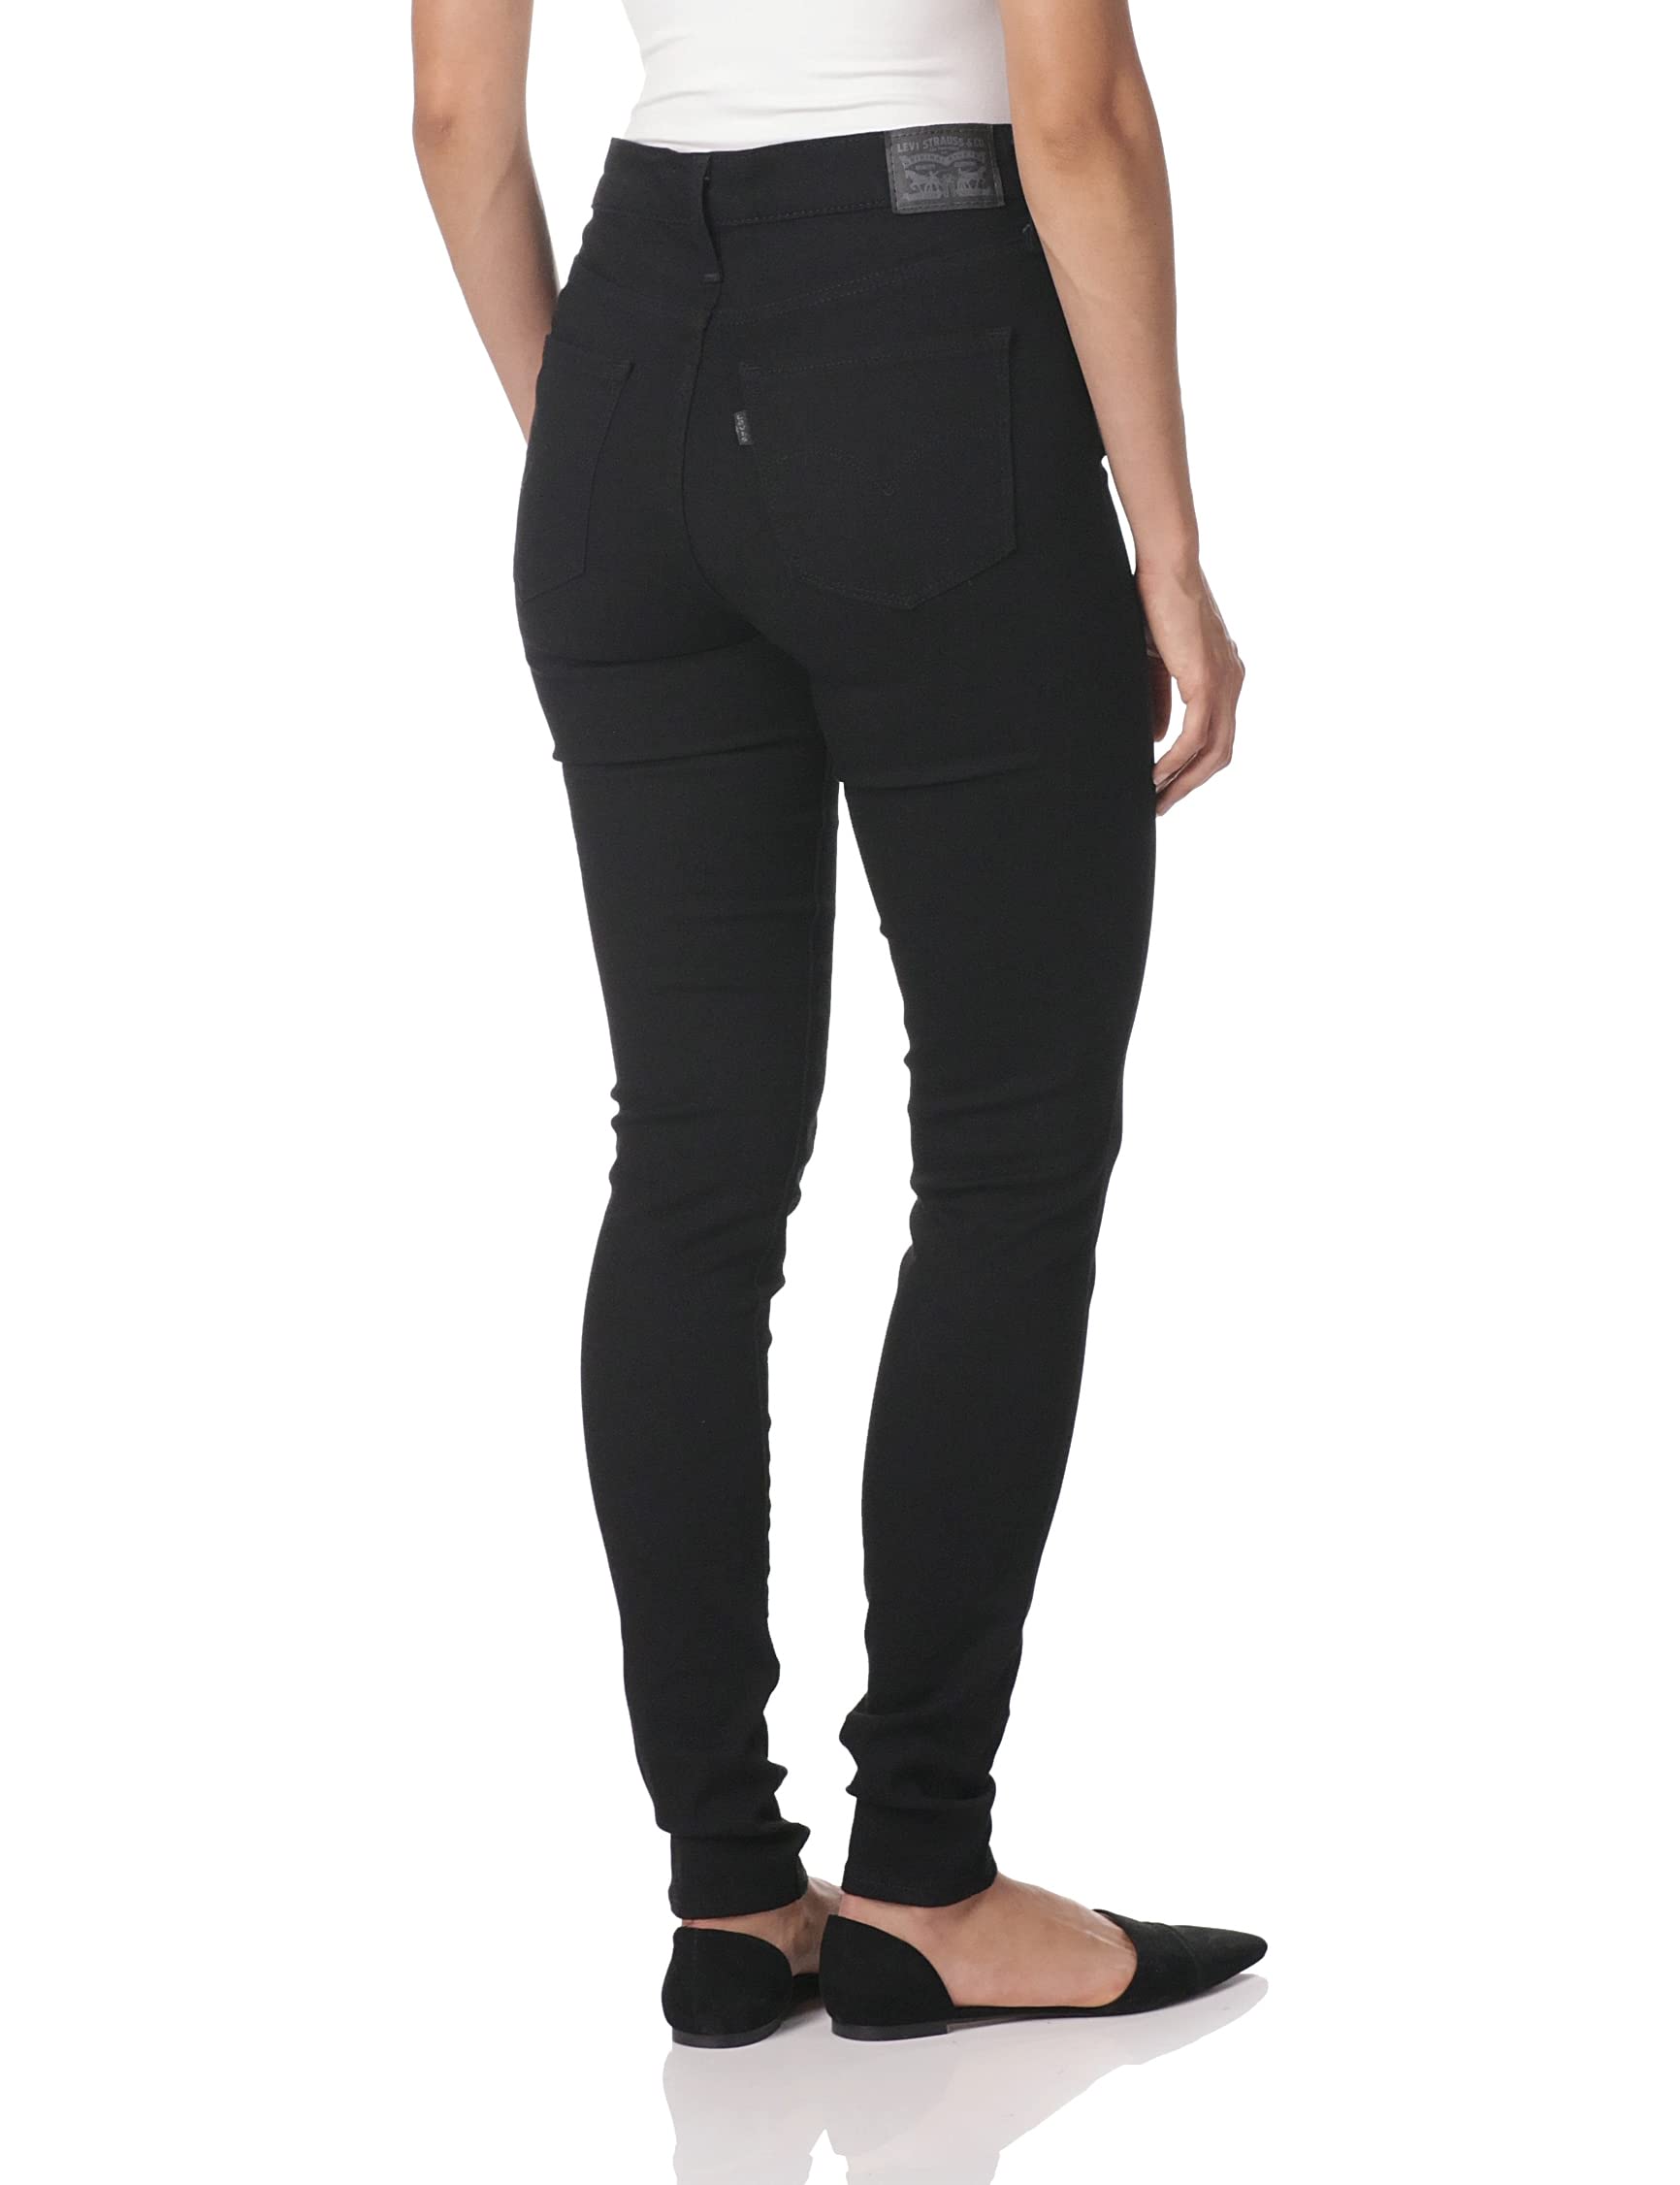 Levi's Women's 720 High Rise Super Skinny Jeans (Also Available in Plus)